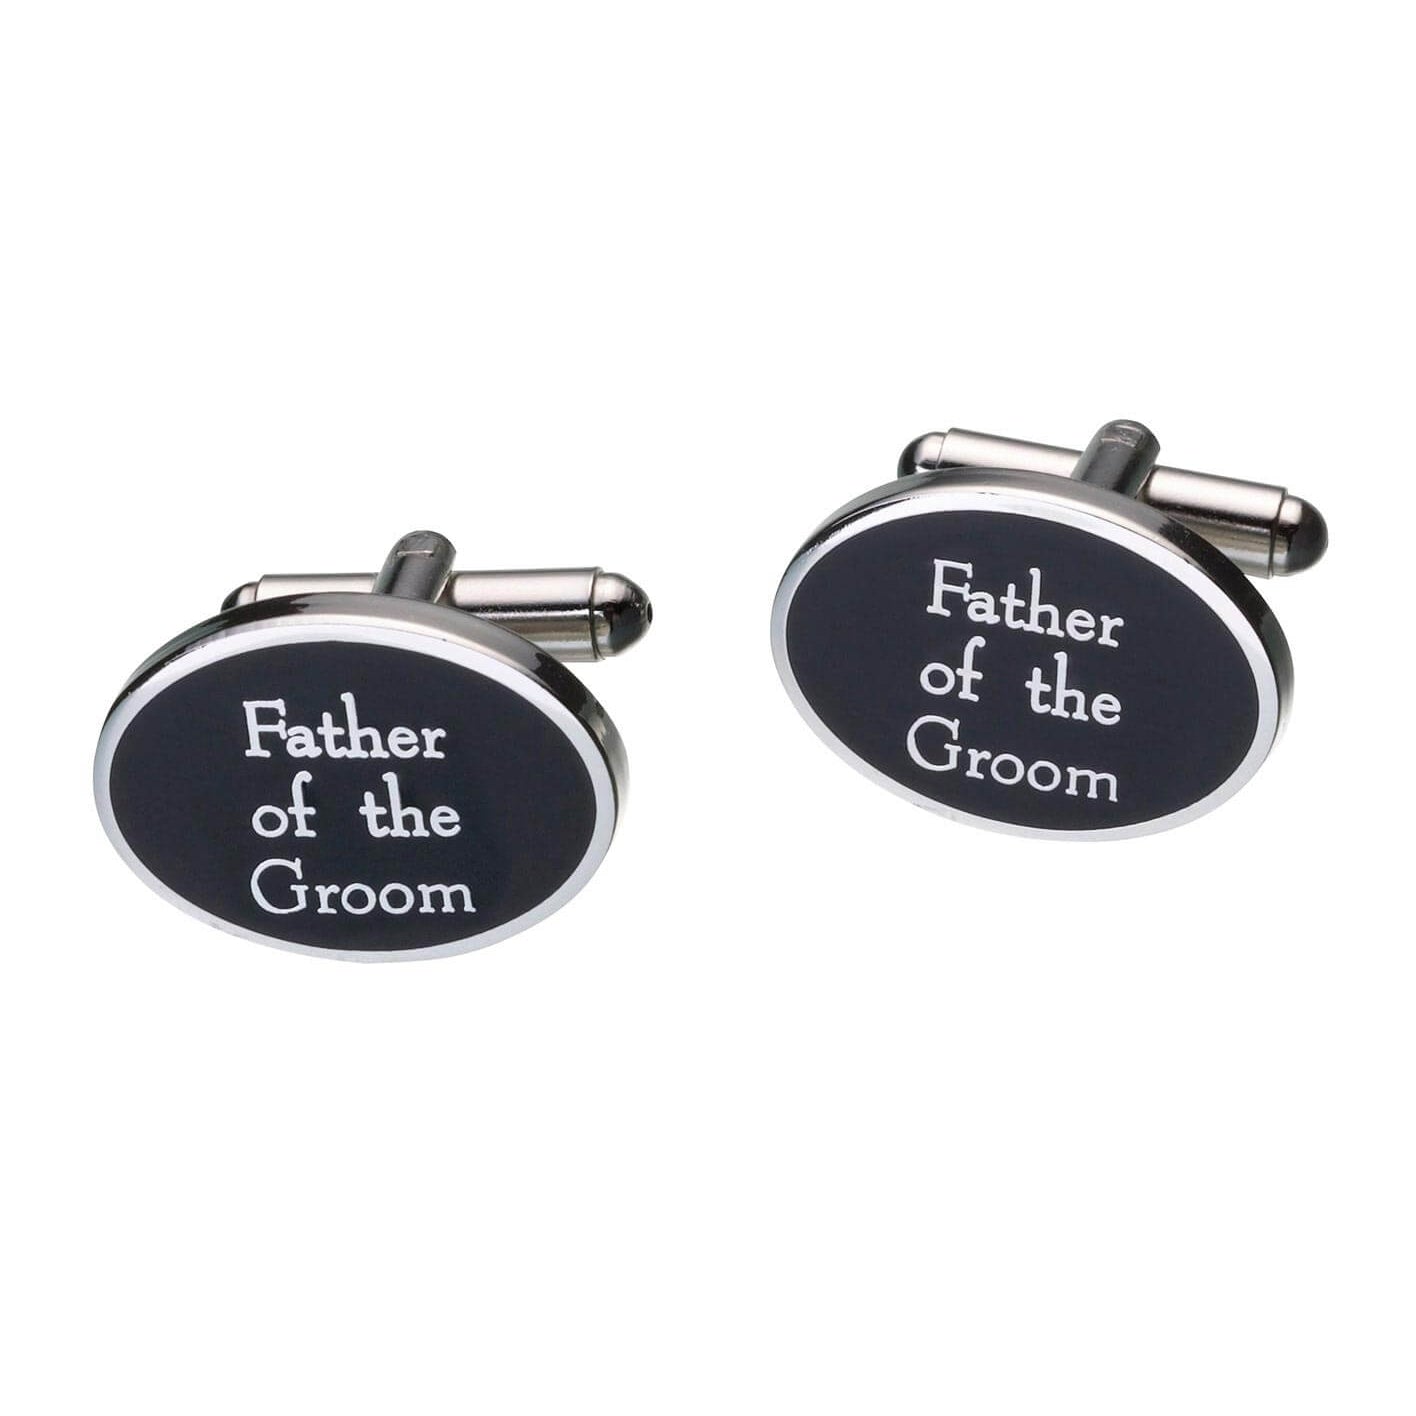 FATHER OF THE GROOM CUFF LINKS - Minter and Richter Designs